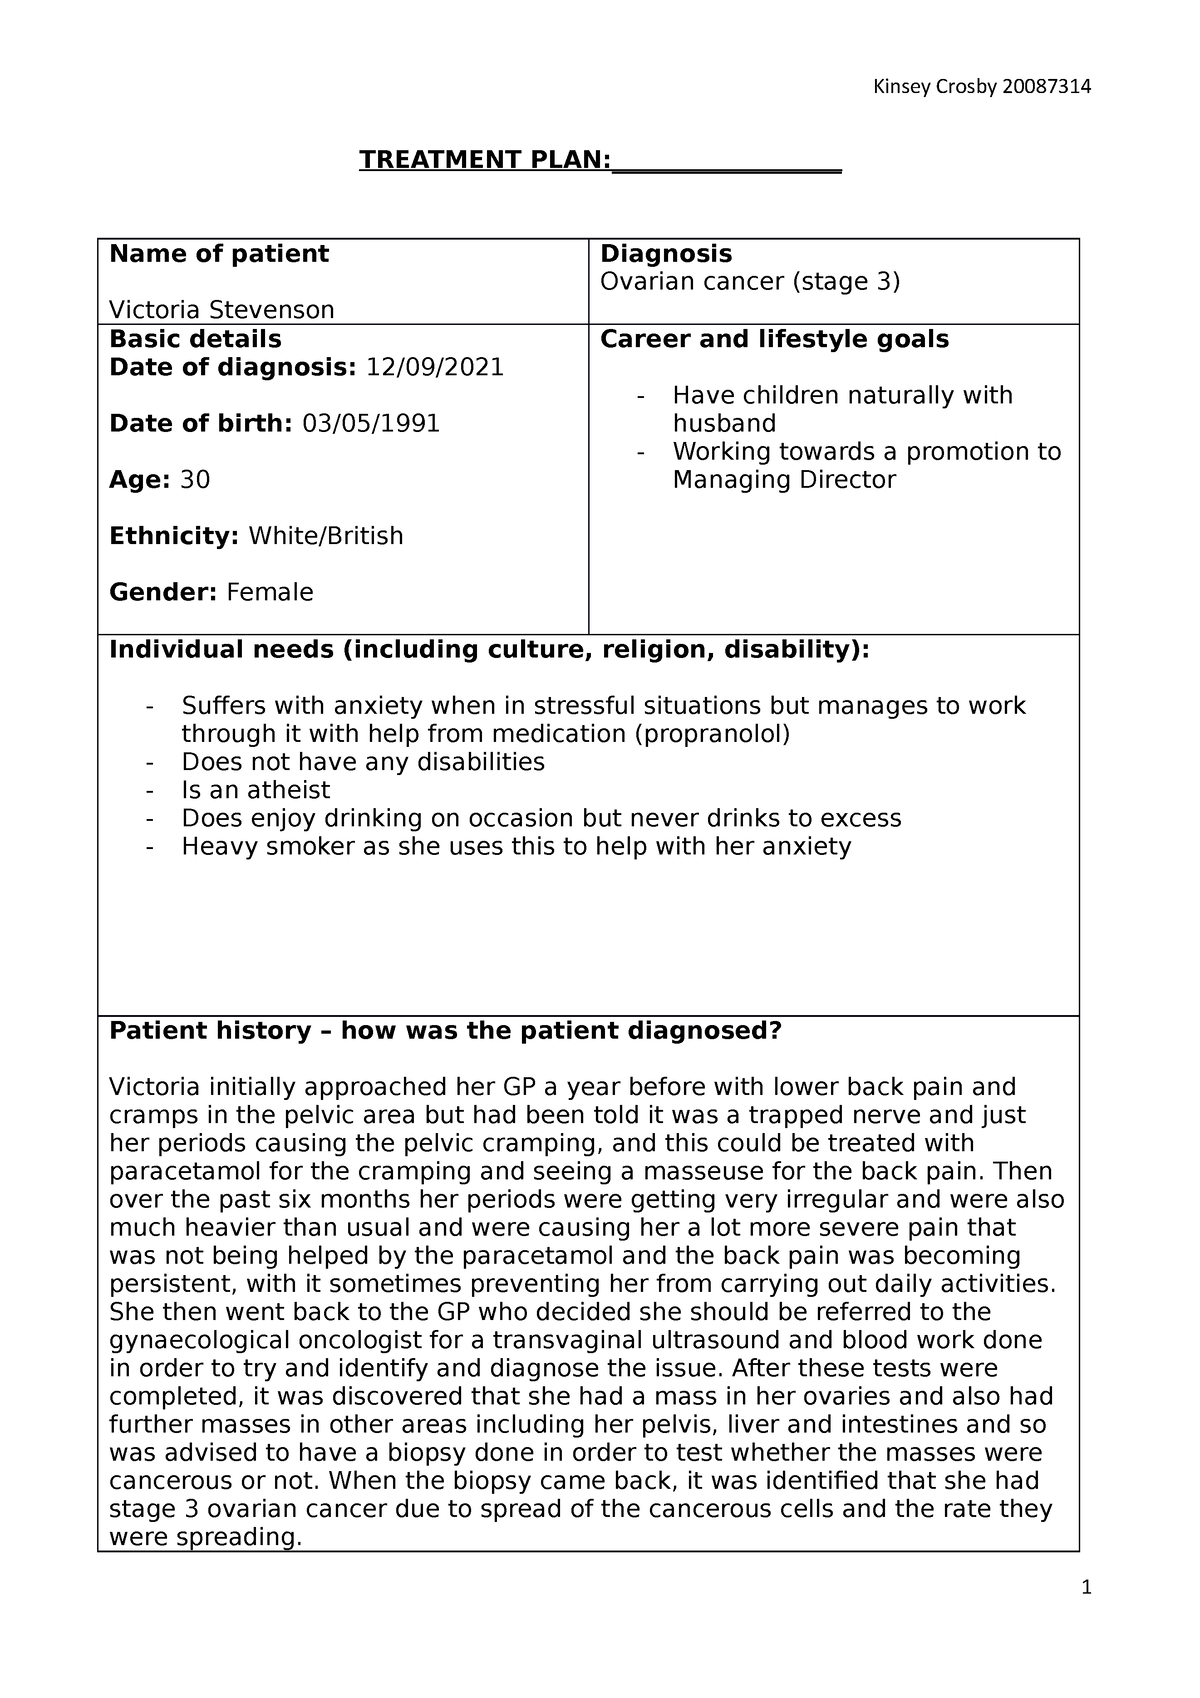 btec level 3 health and social care unit 14 coursework